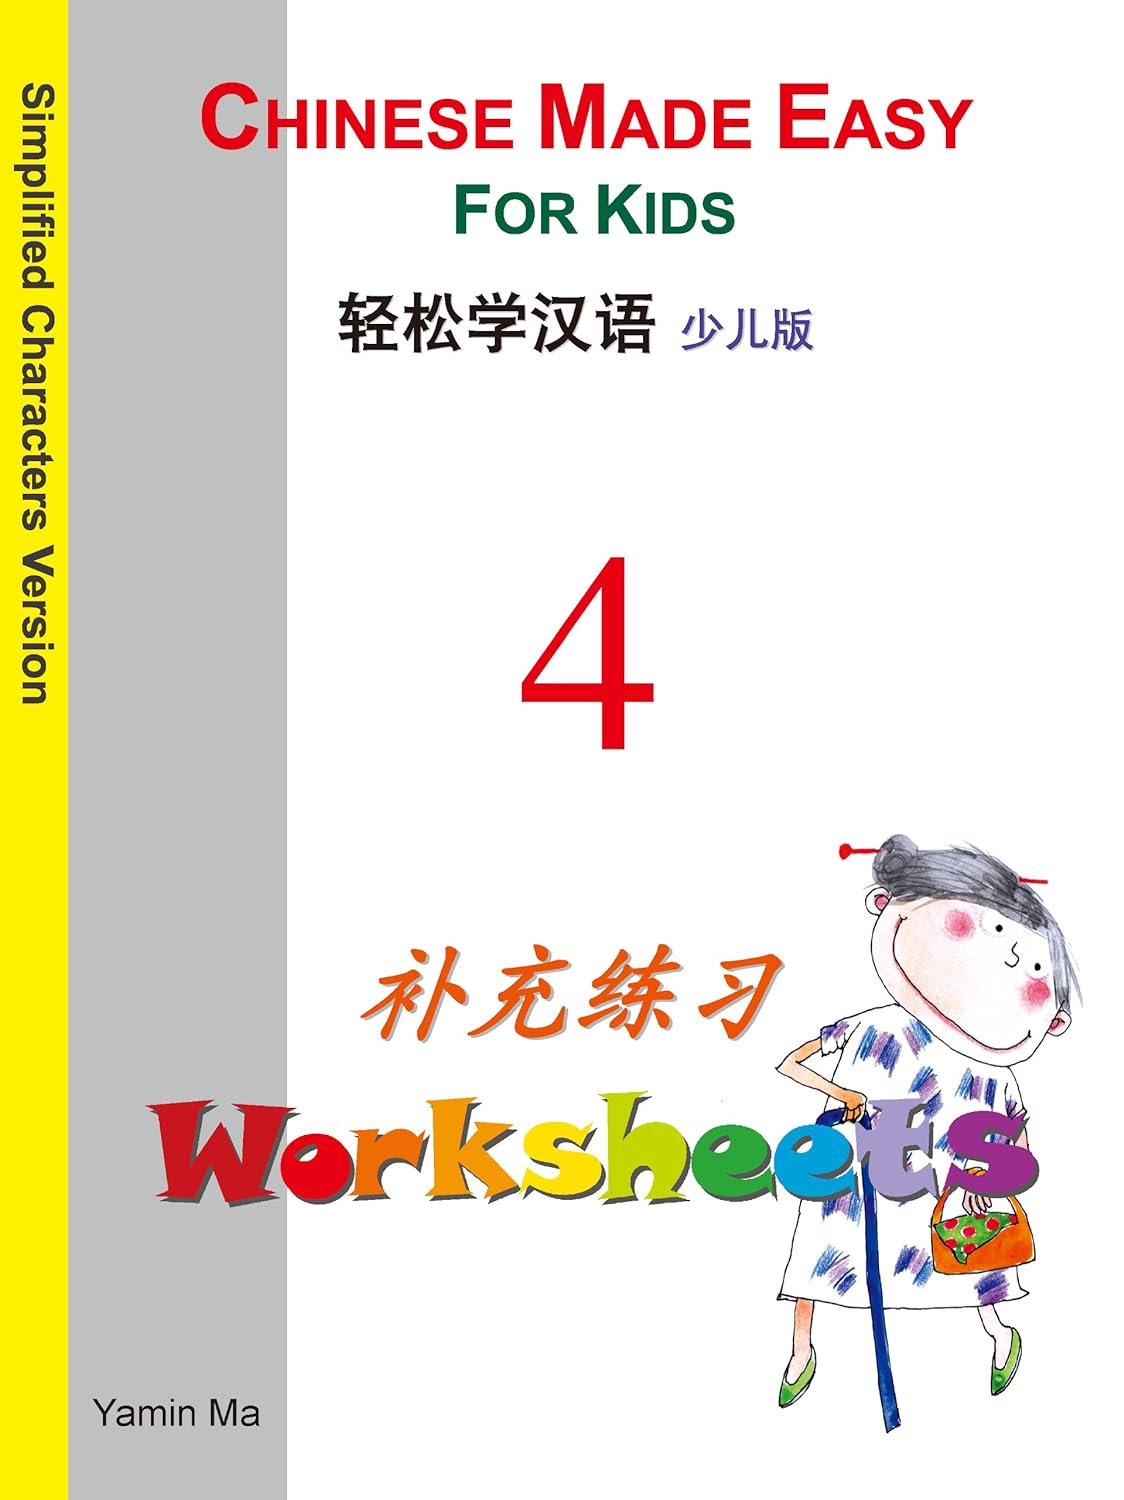 Chinese Made Easy For Kids (Simplified) Worksheets 4